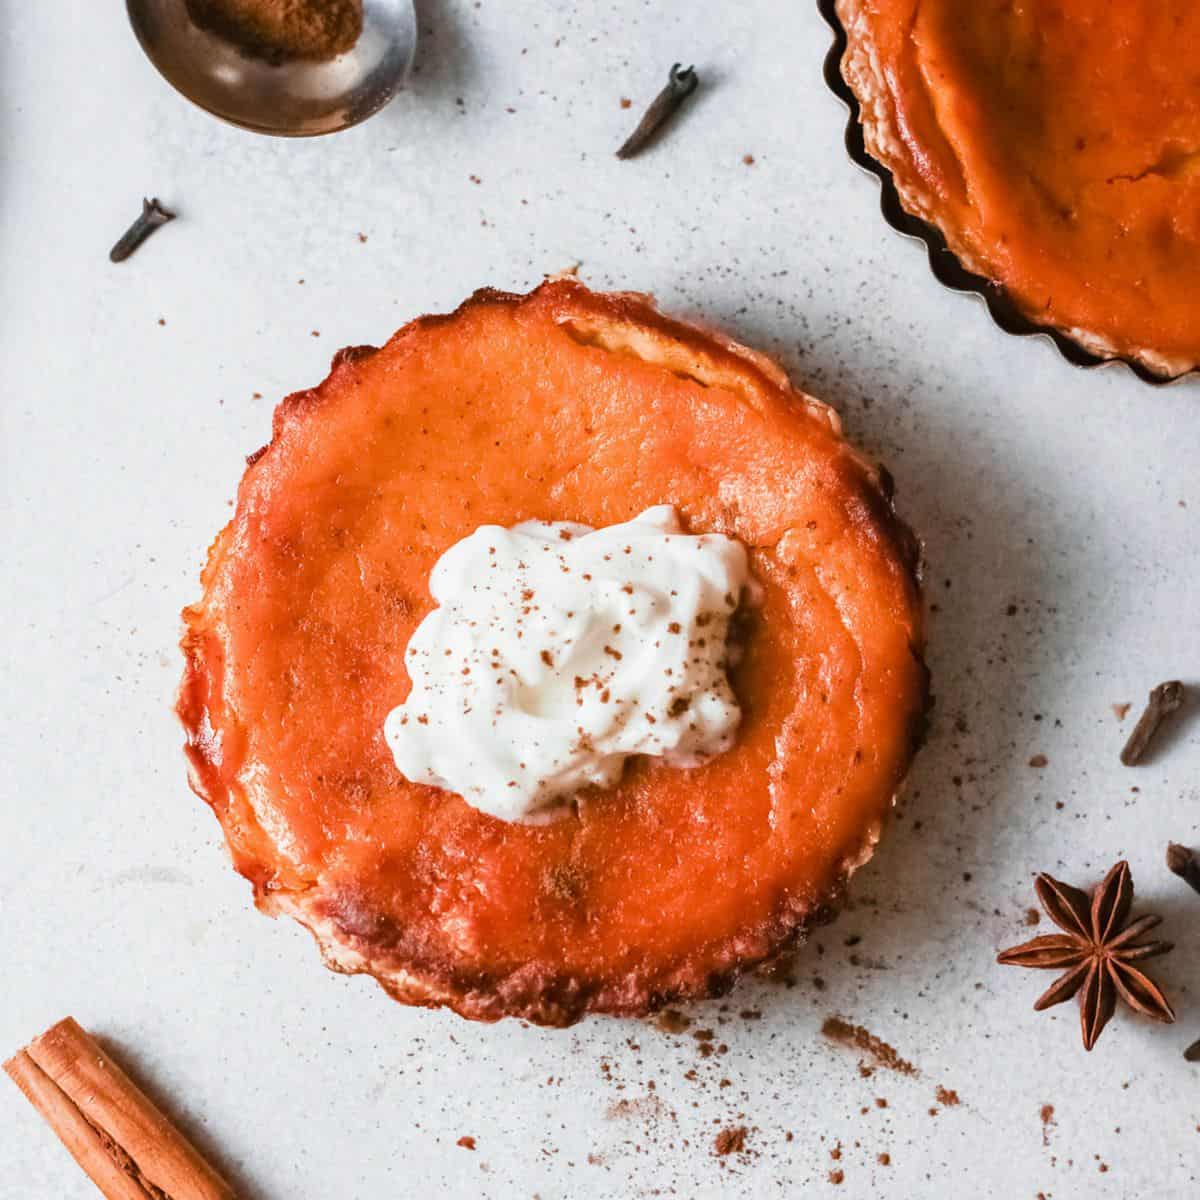 Fireball pumpkin pie topped with whipped cream on a table next to cinnamon sticks.